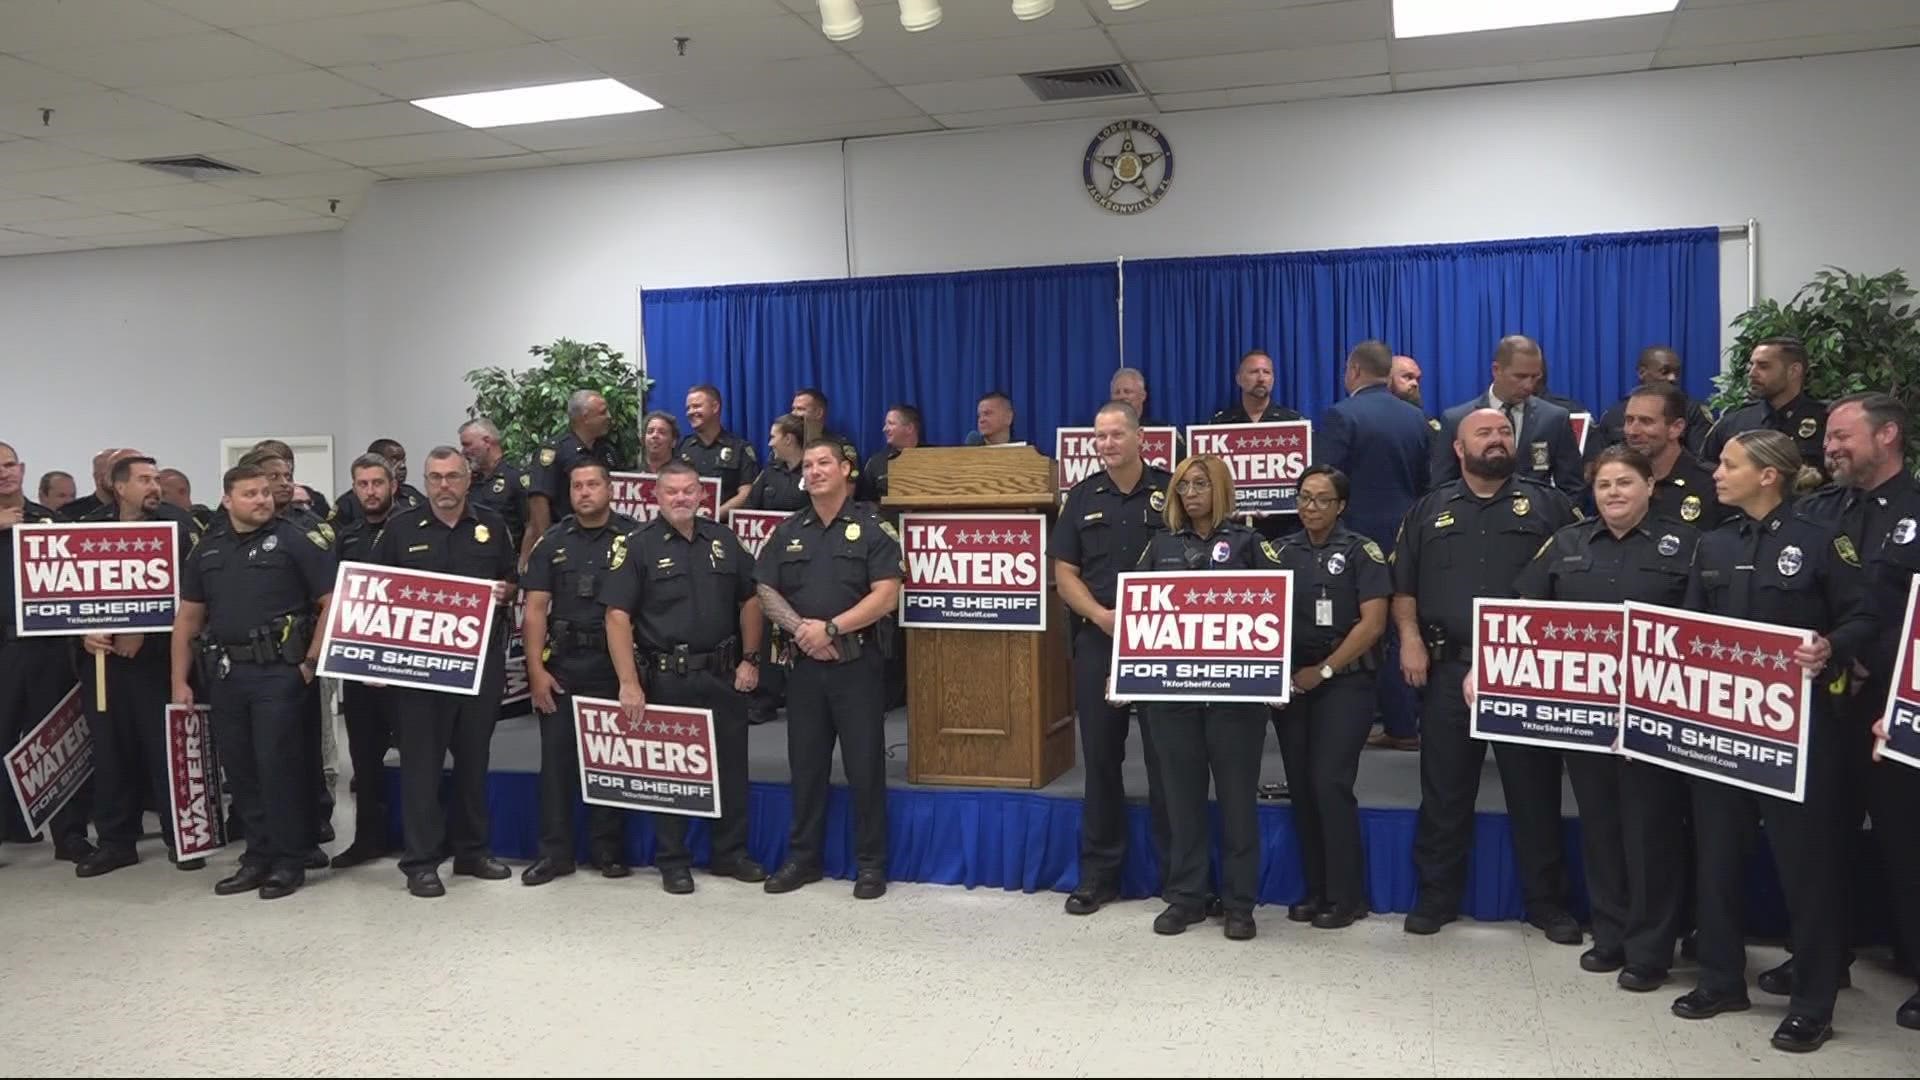 Waters was endorsed by former officer Ken Jefferson, who was previously running for sheriff.